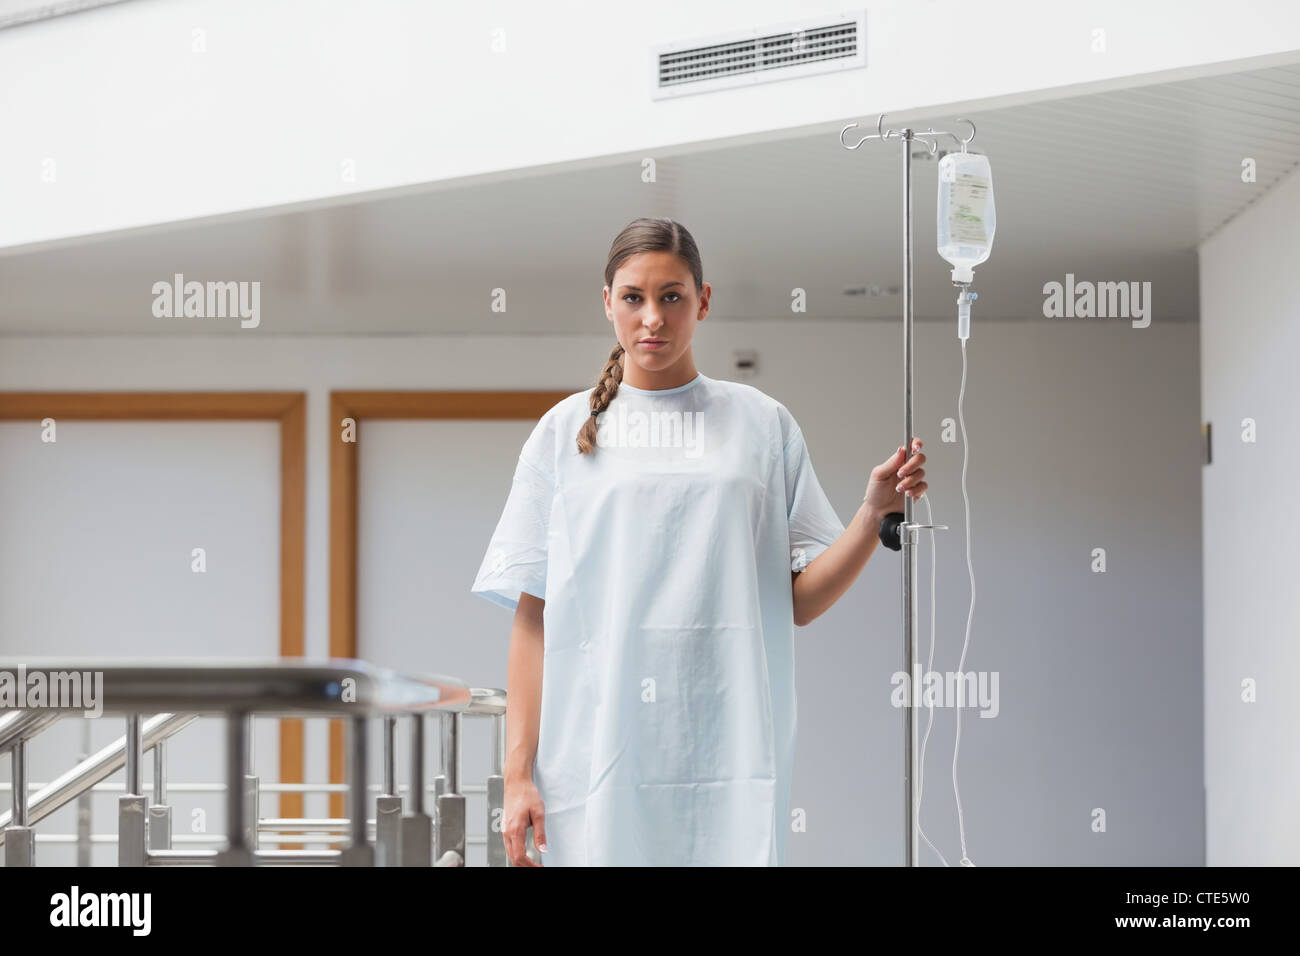 Female patient walking with a drip stand Stock Photo